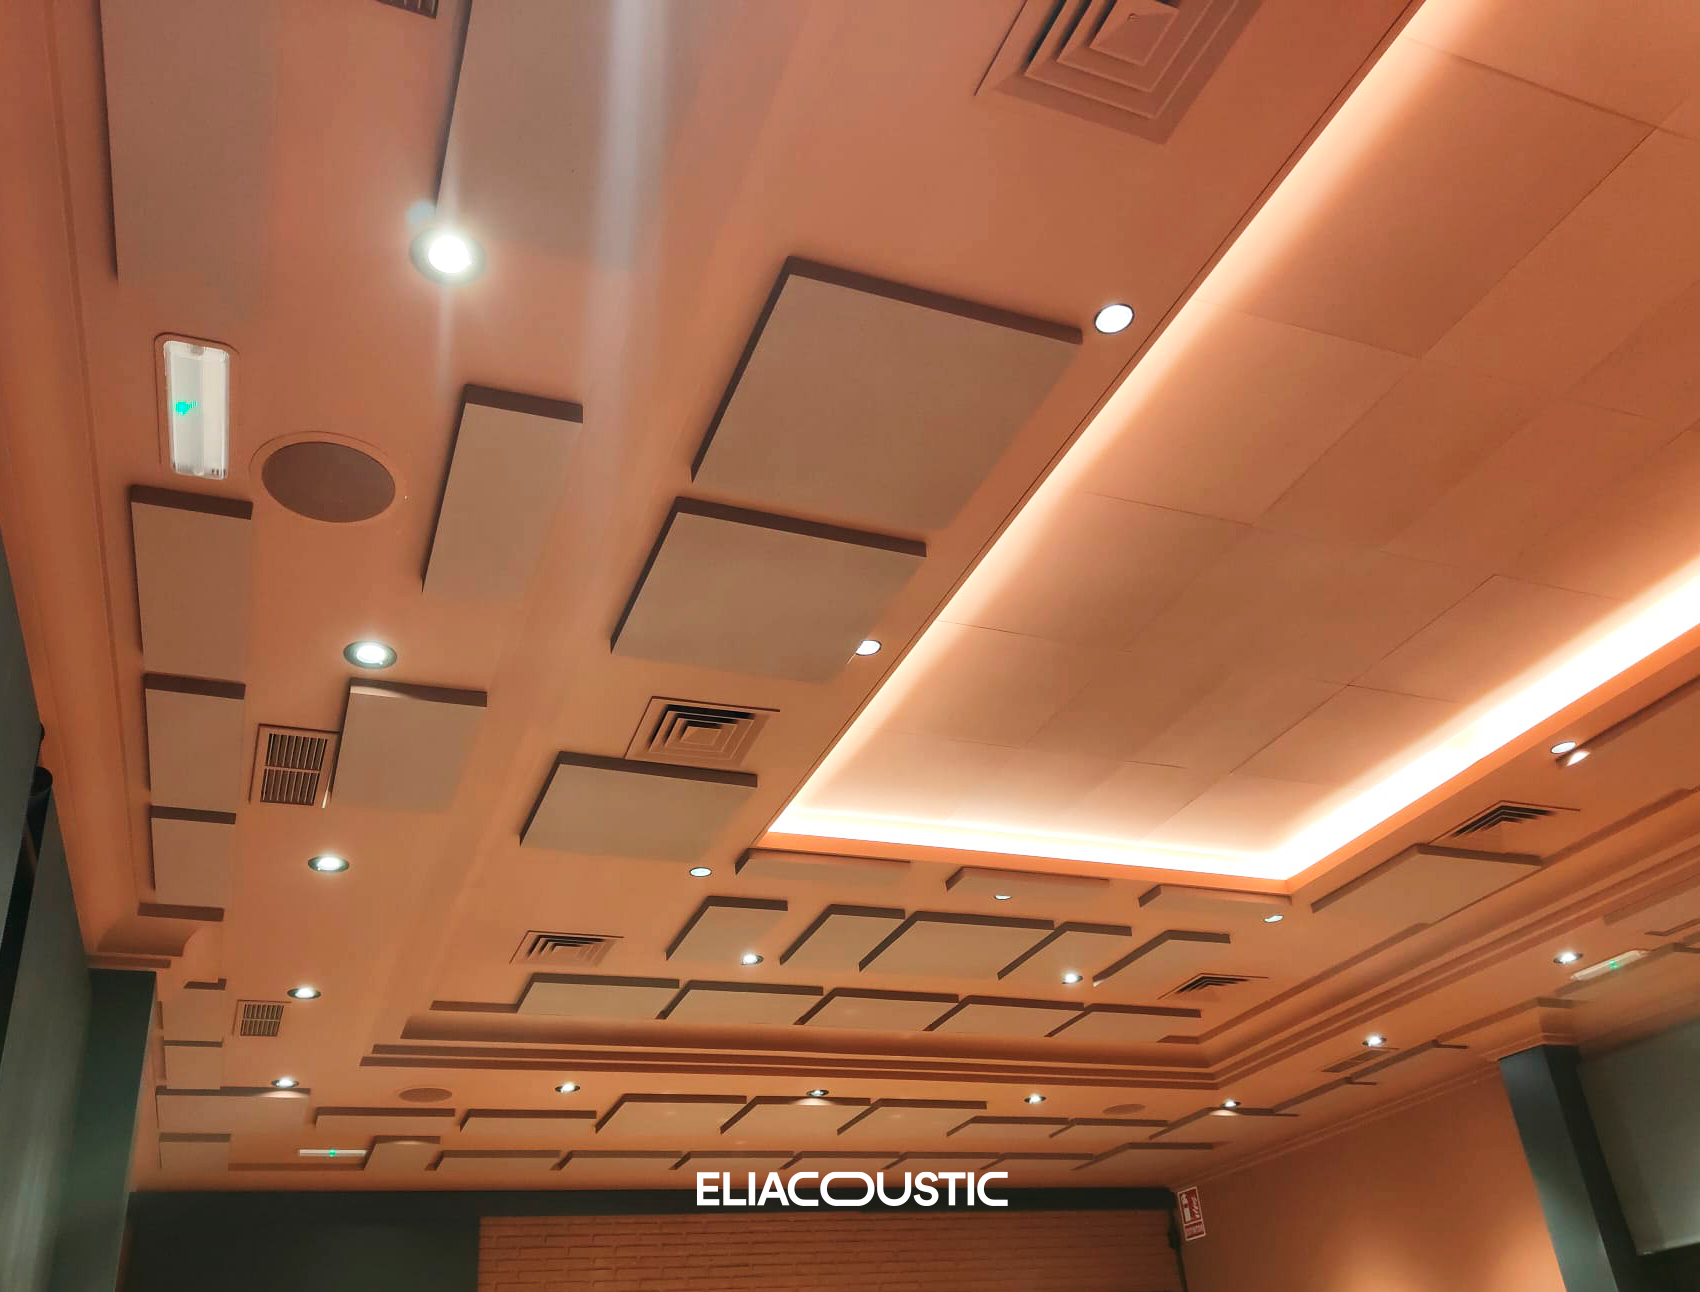 Acoustic conditioning by Eliacoustic for restaurant bar Valencia 1948